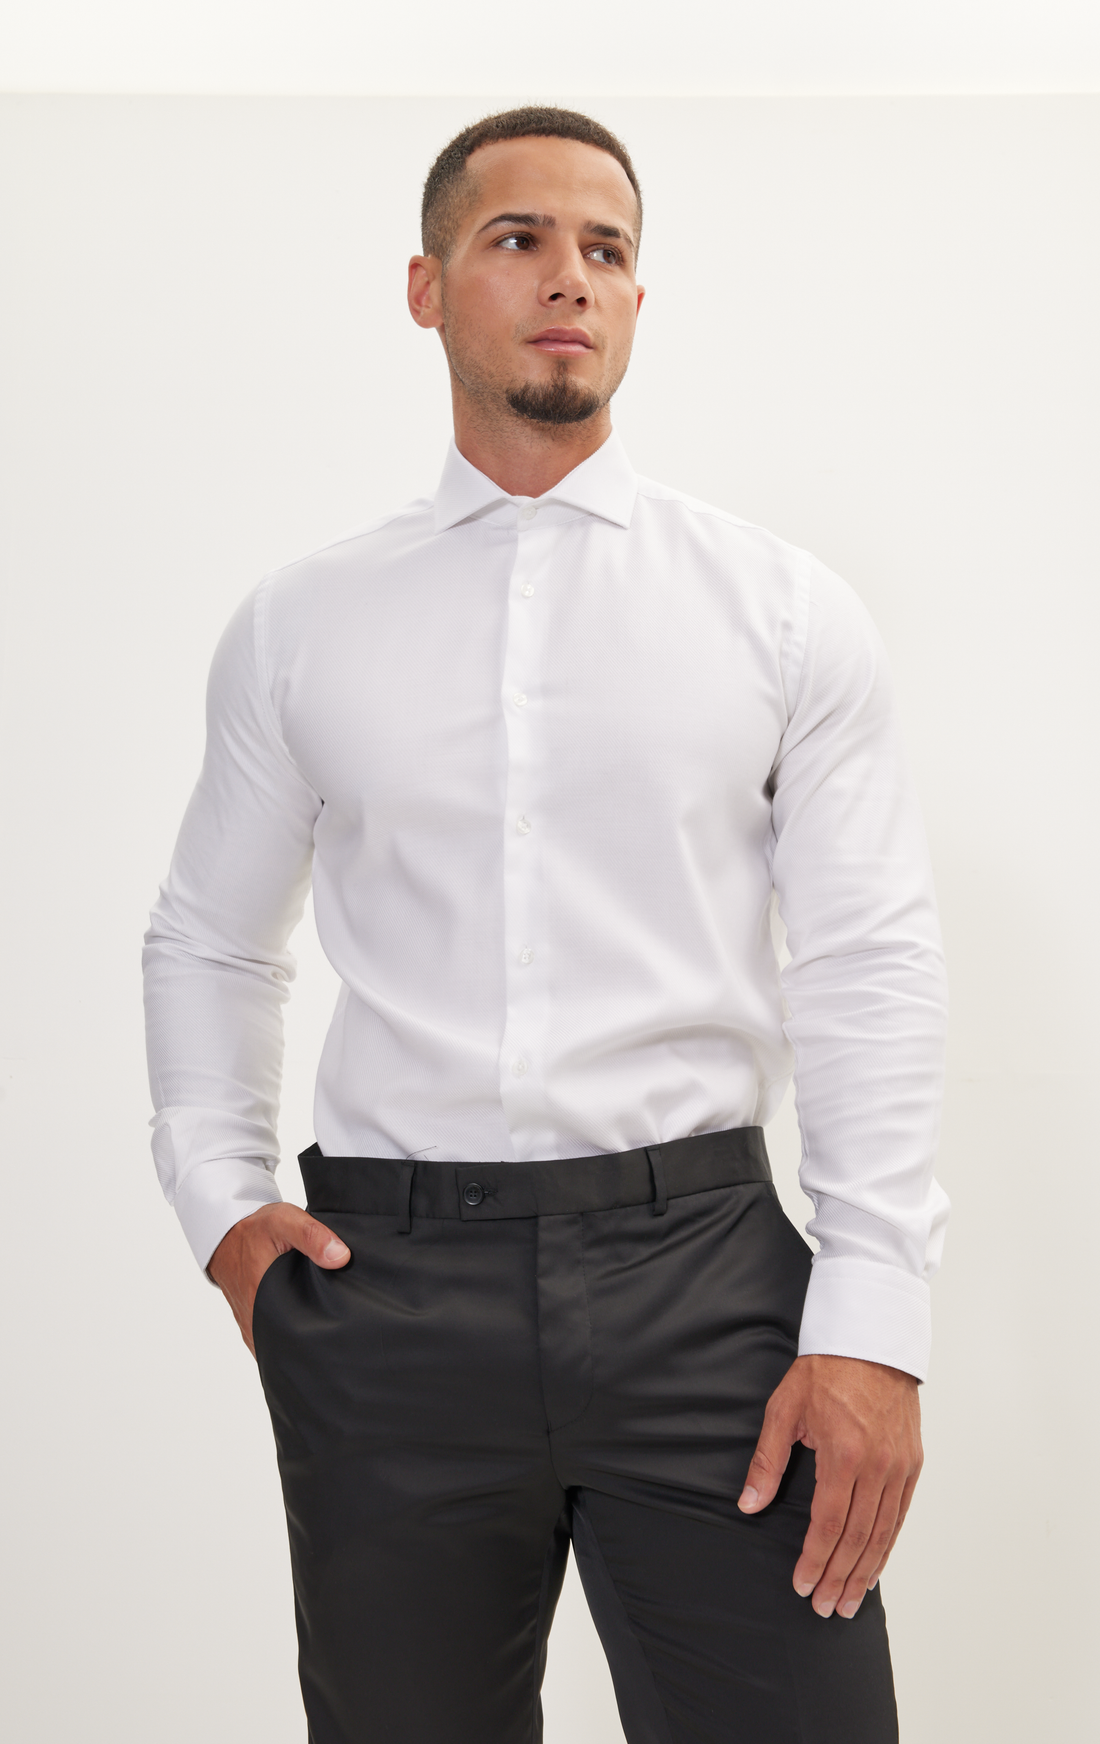 N° AN4902 PURE COTTON FRENCH PLACKET SPREAD COLLAR DRESS SHIRT - WHITE GREY TWILL